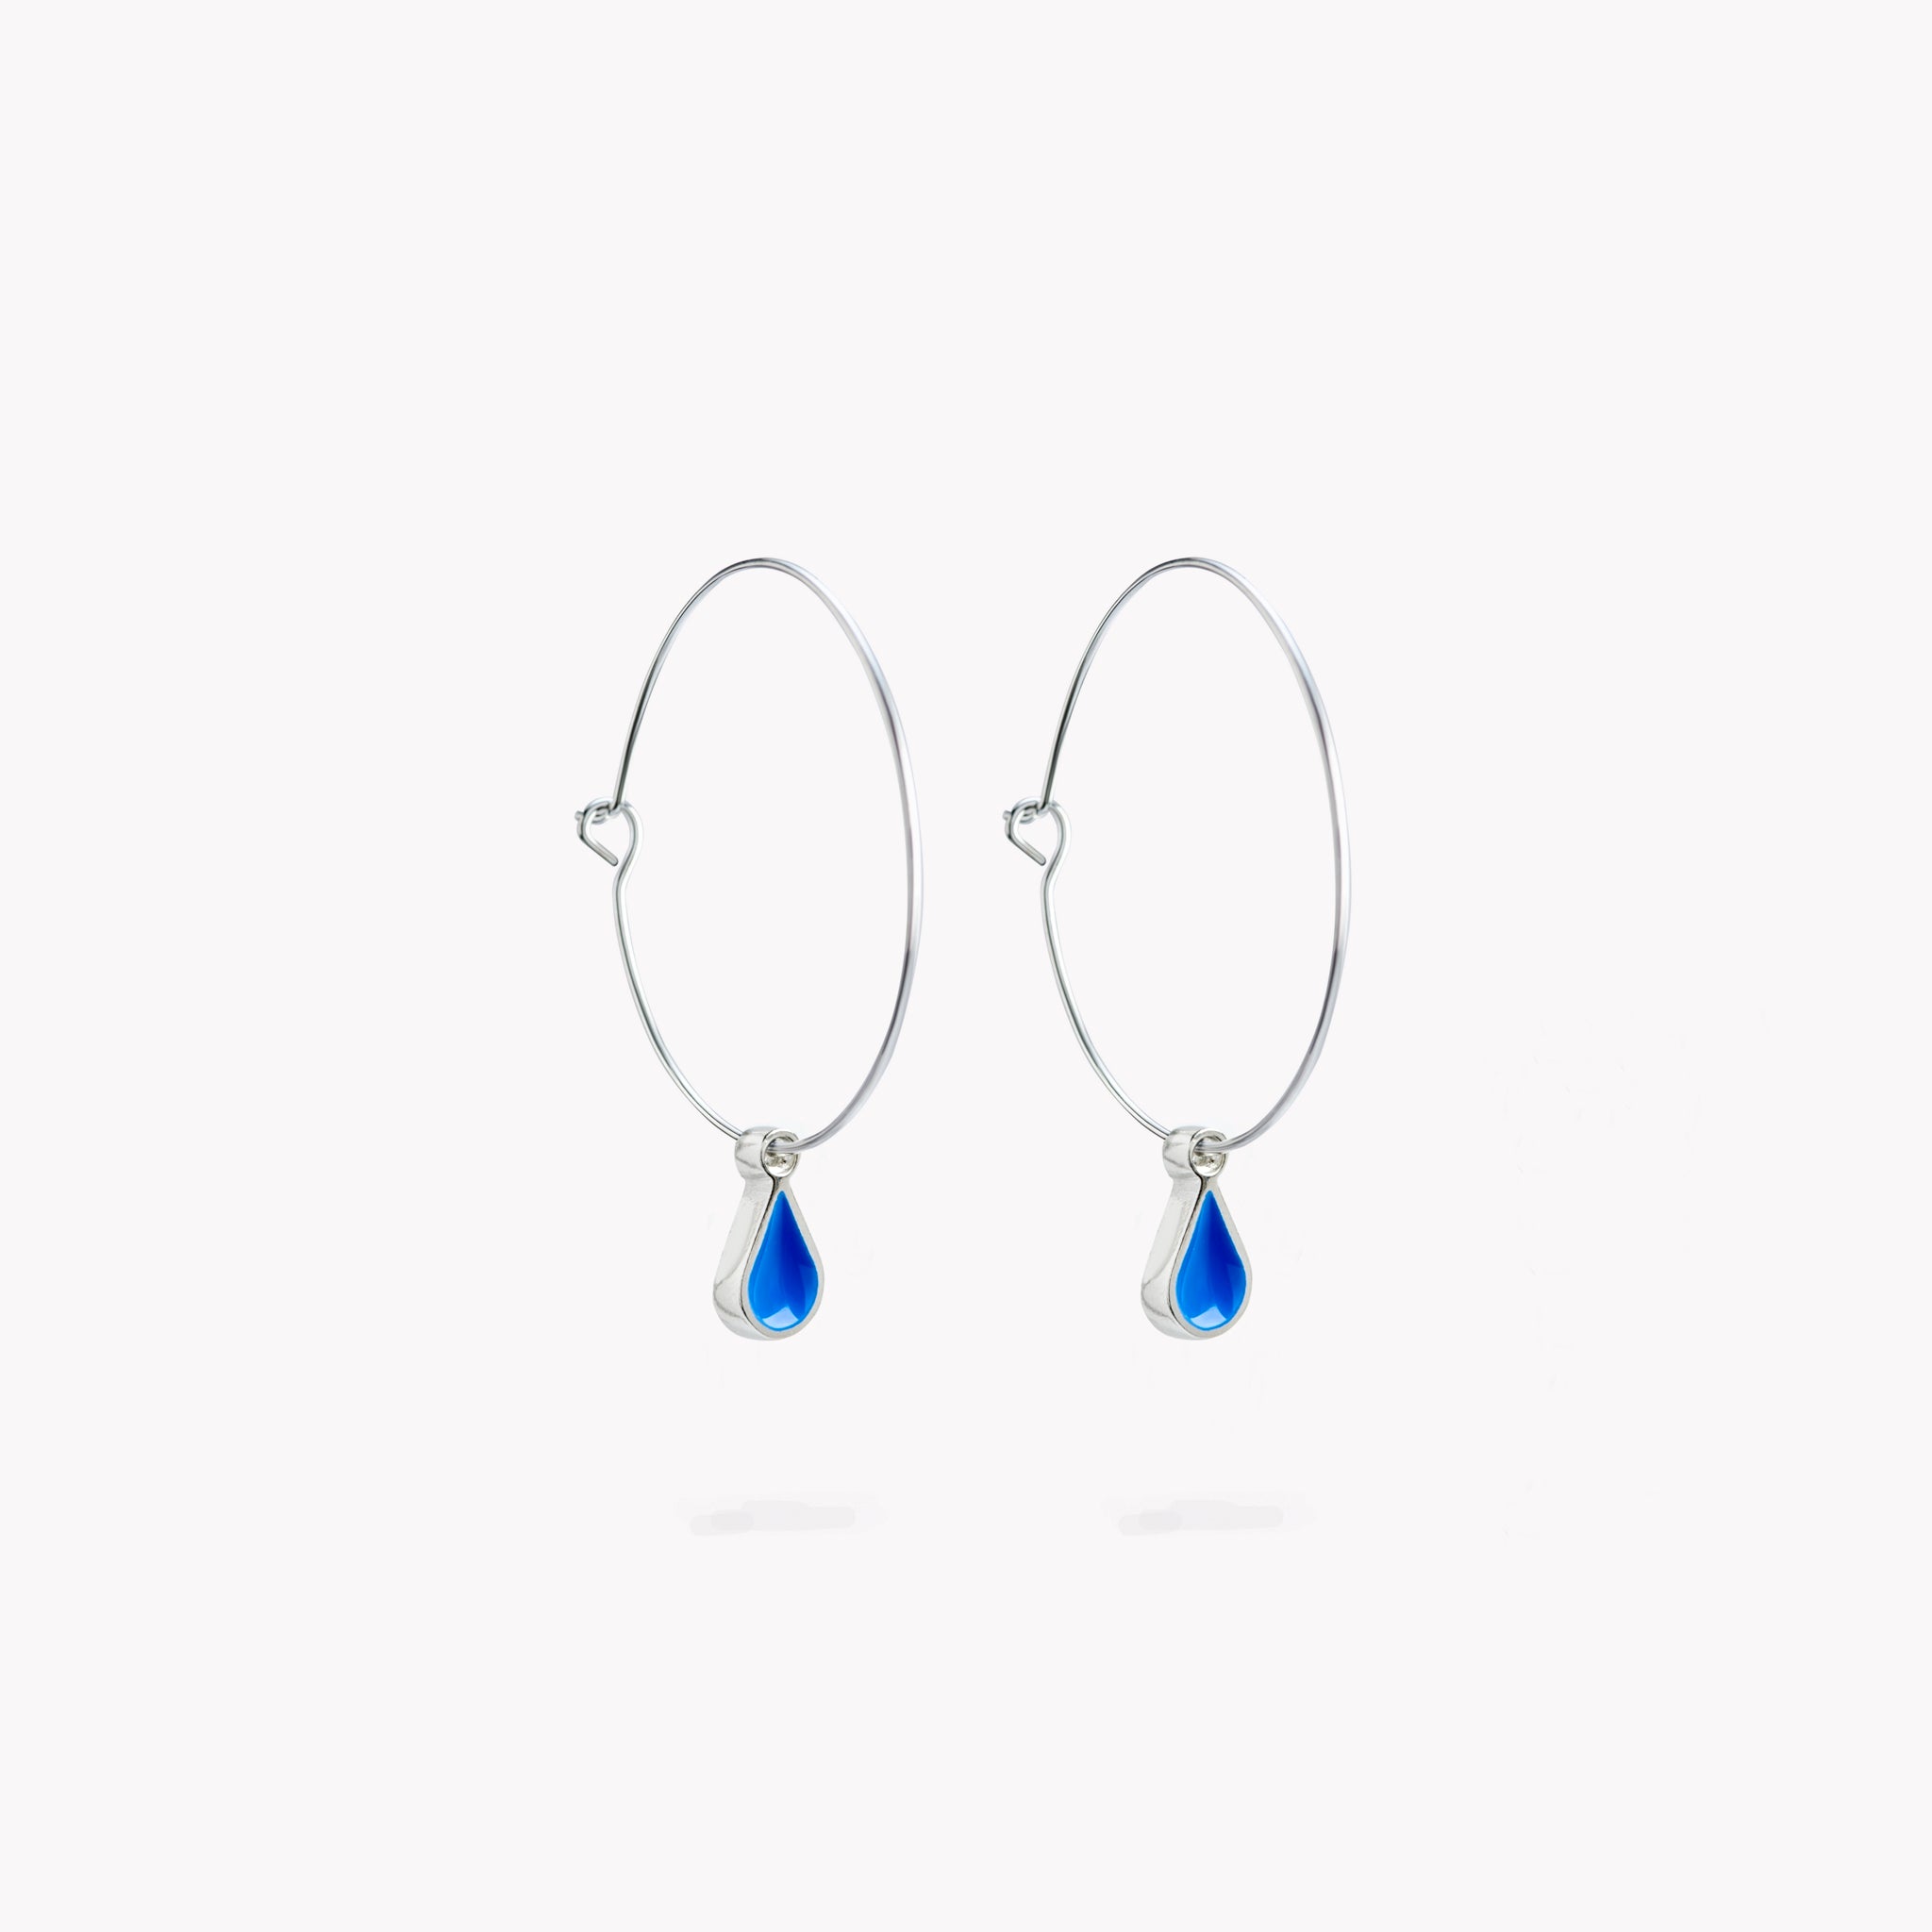 A simple pair of hoop earrings with bright blue hanging droplets.